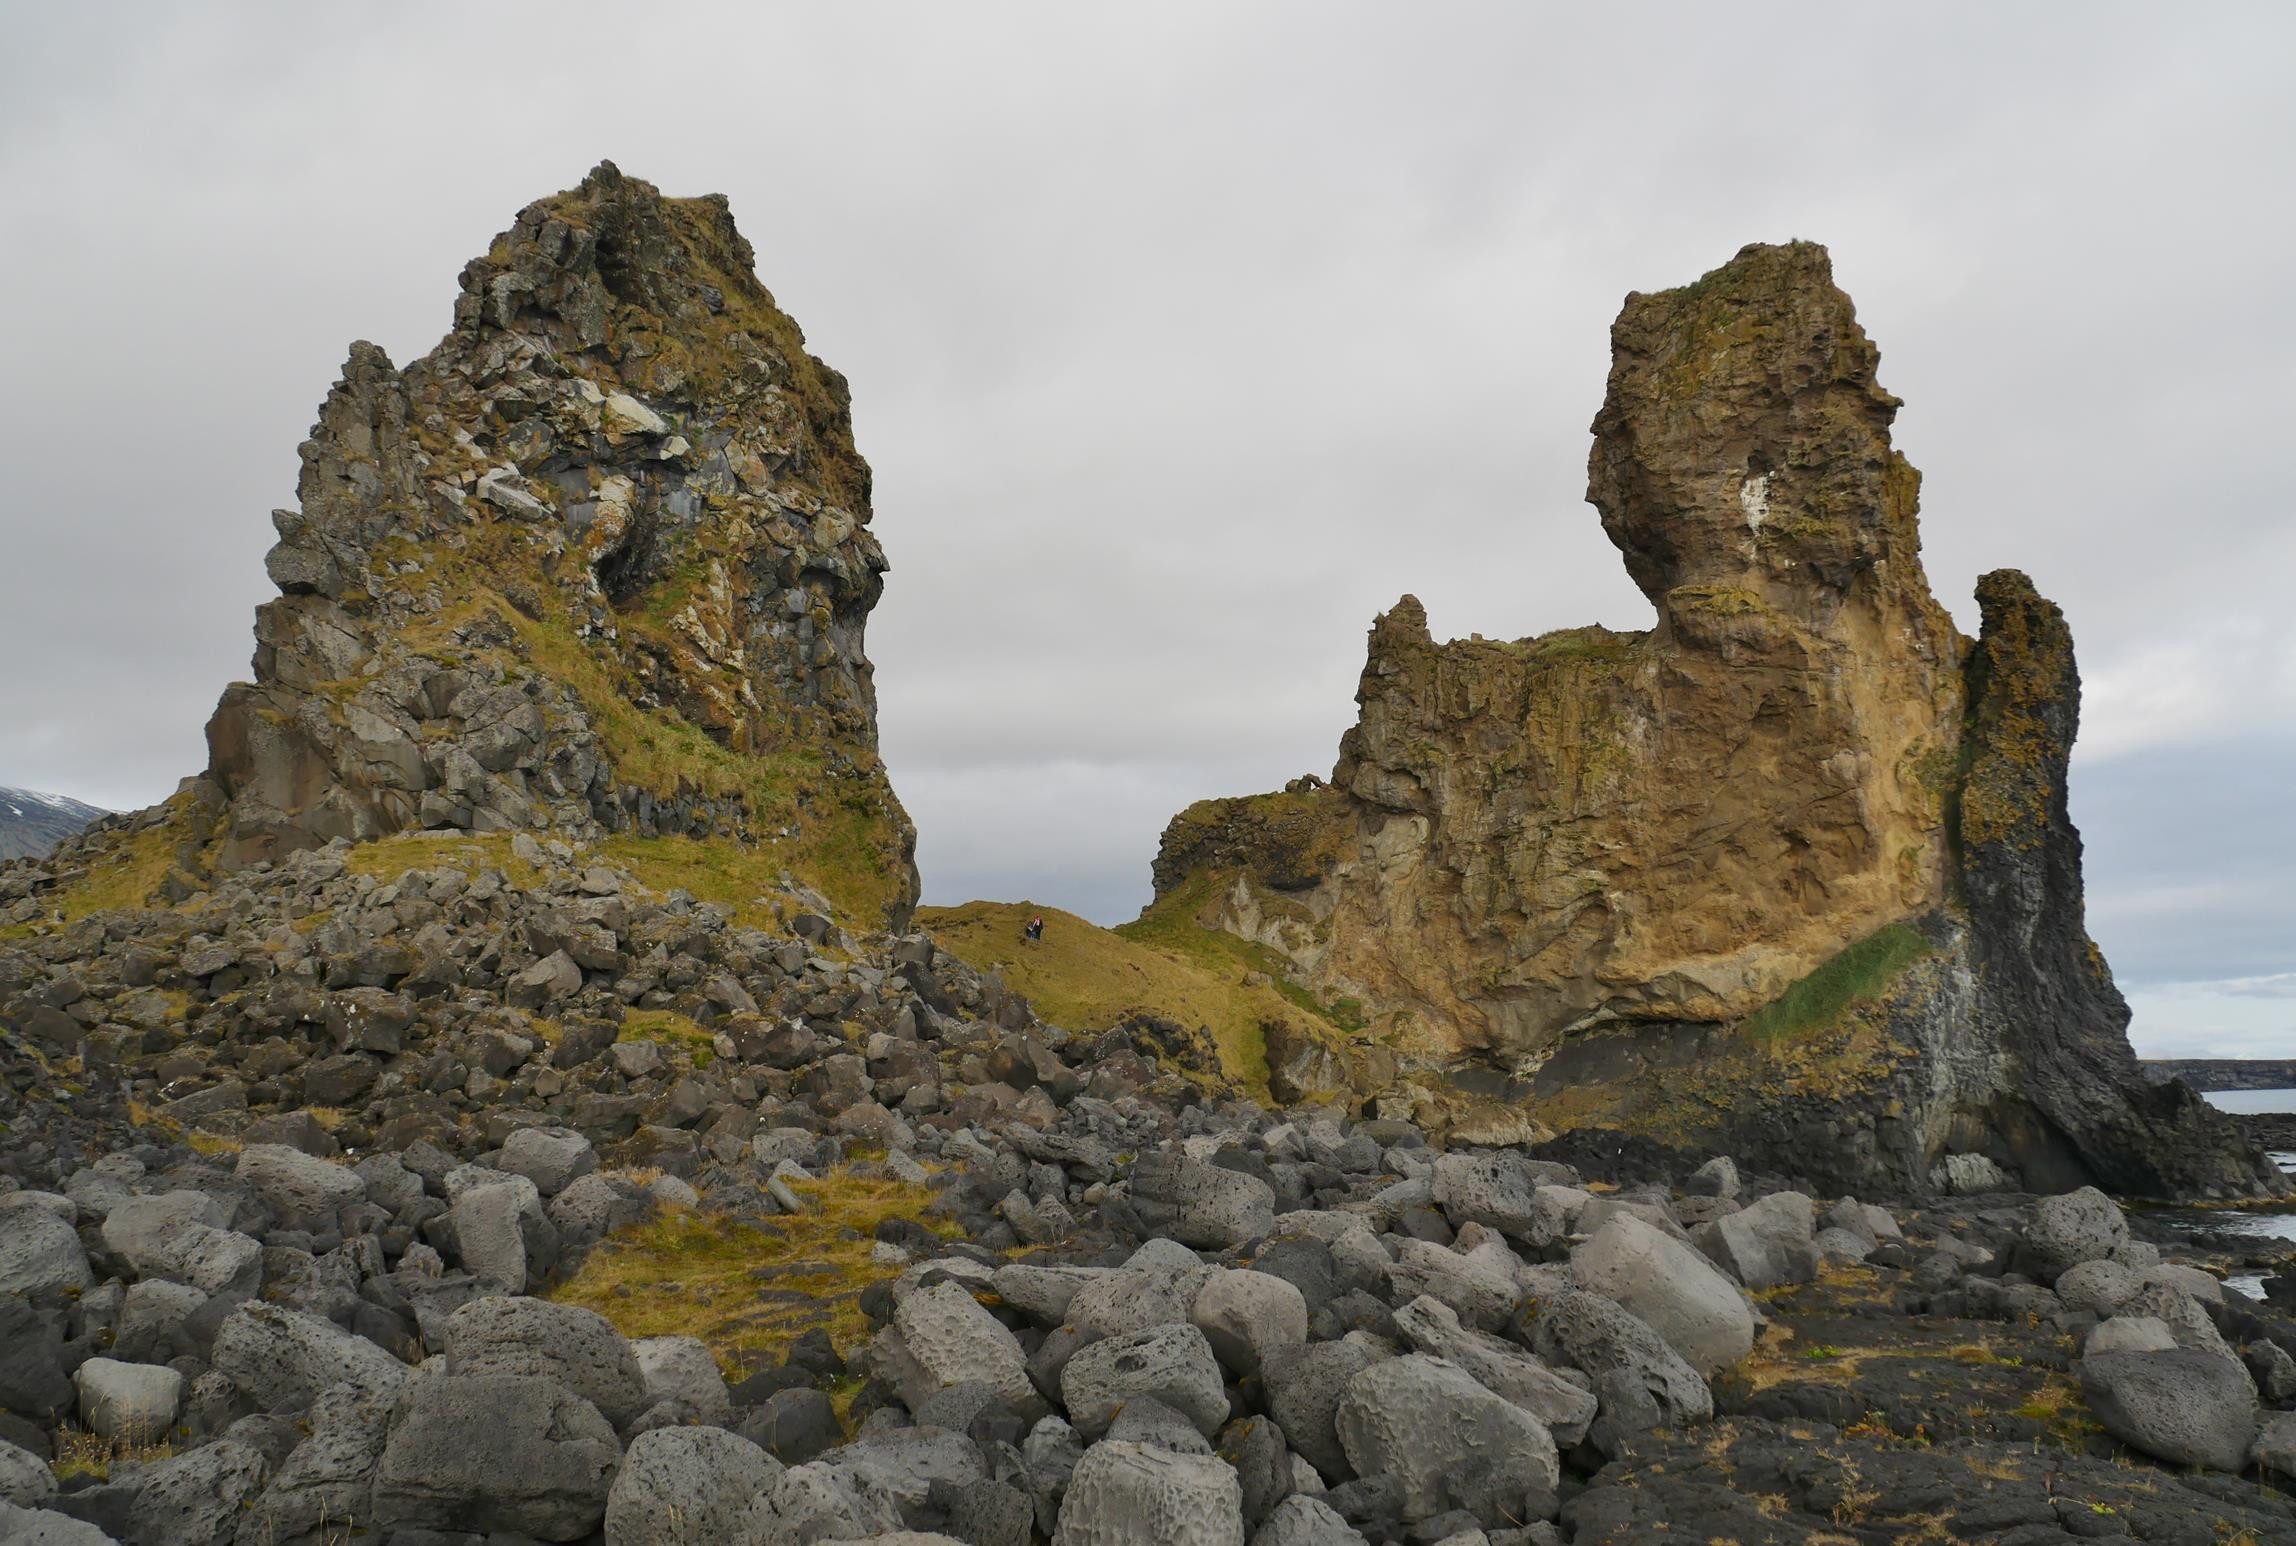 Lóndrangar, a pair of basalt volcanic plugs. Cassie and Jacqueline are near the low point between the two stacks